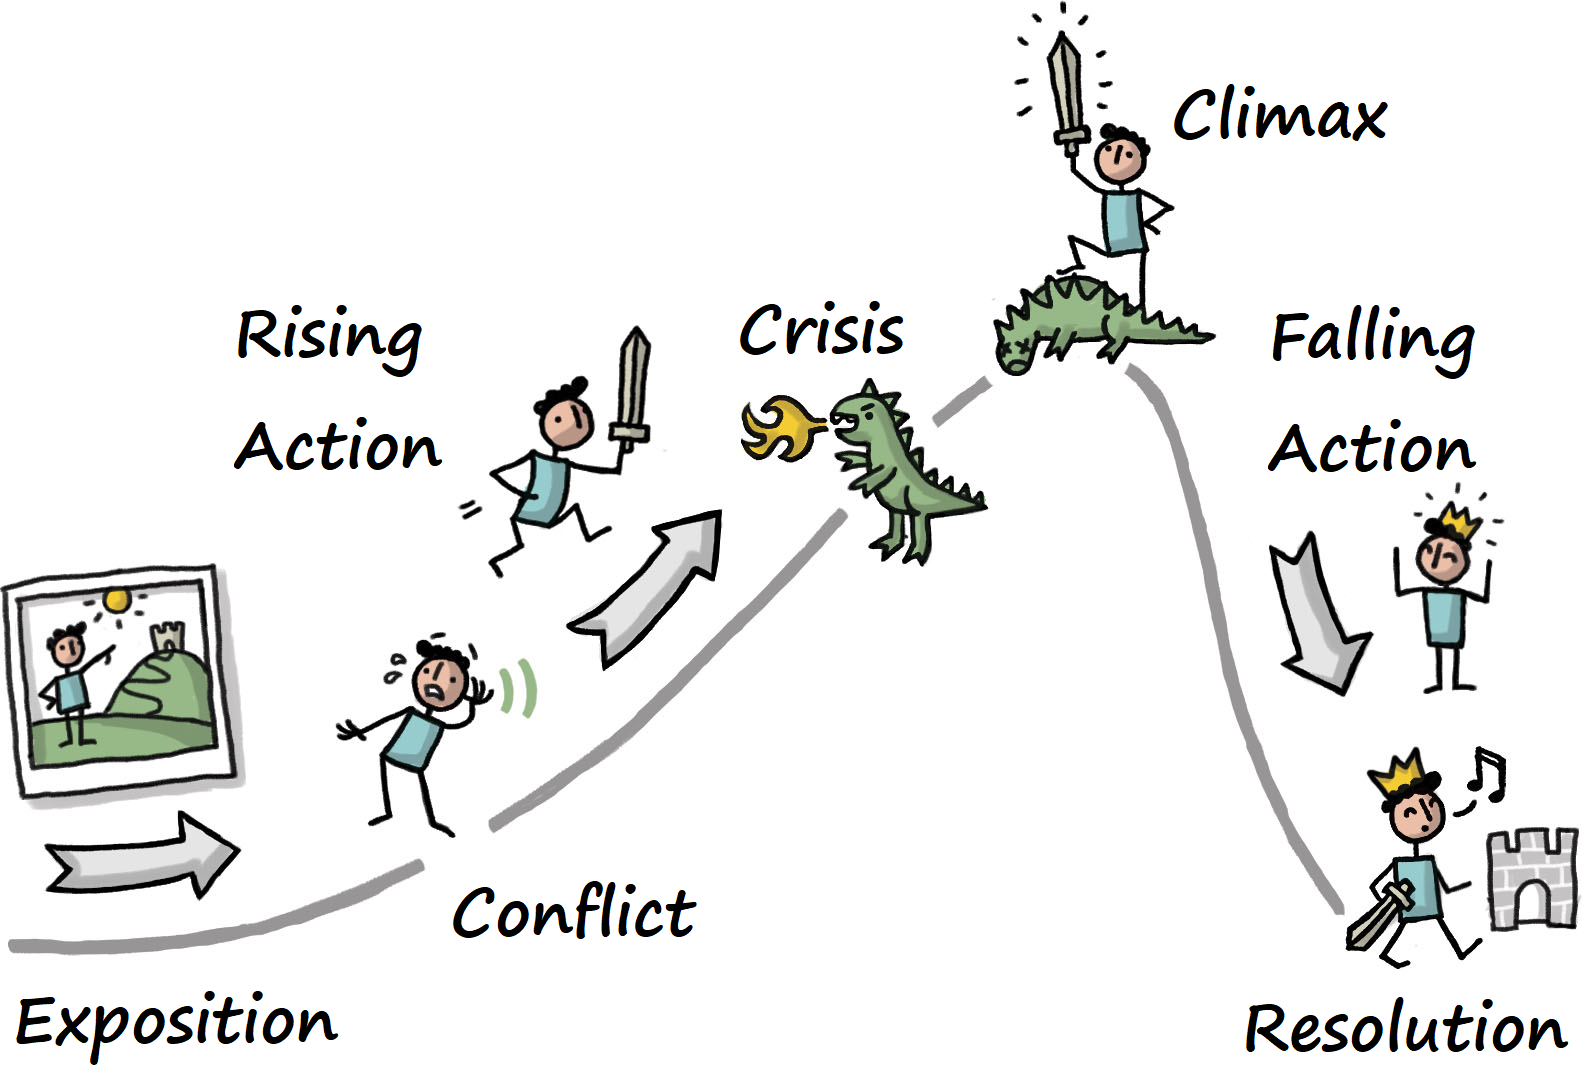 Elements of a story: exposition, conflict, rising action, crisis, climax, falling action, and resolution.